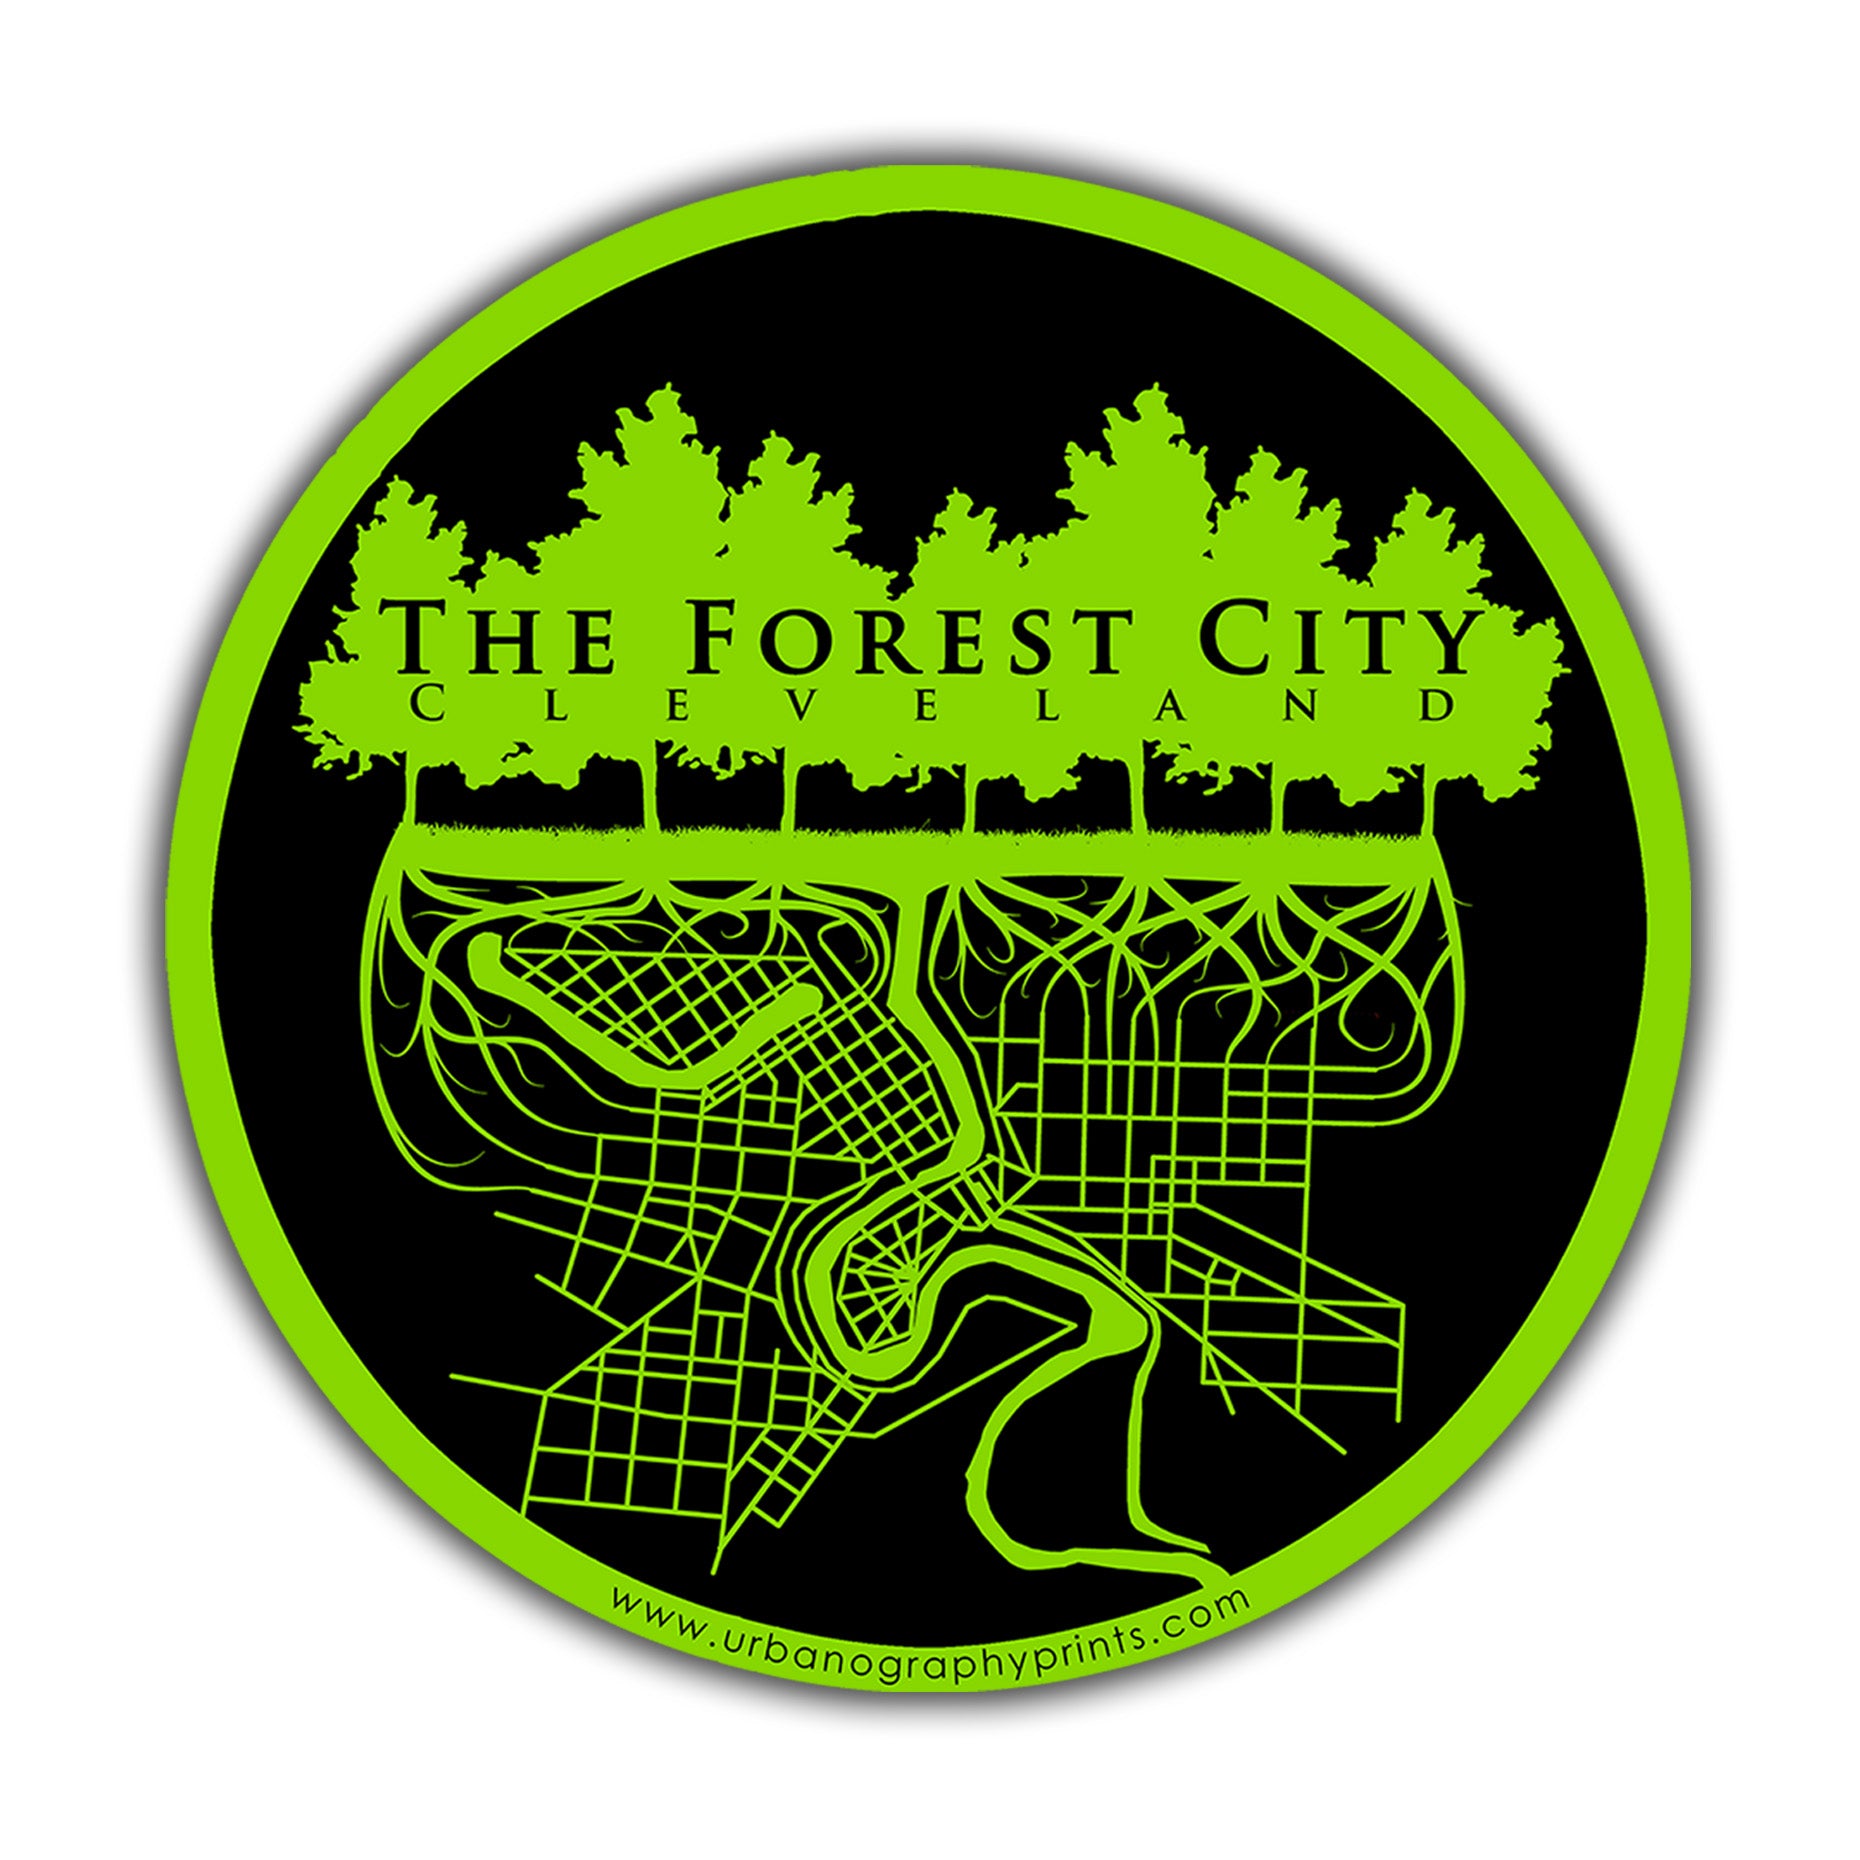 The Forest City Sticker